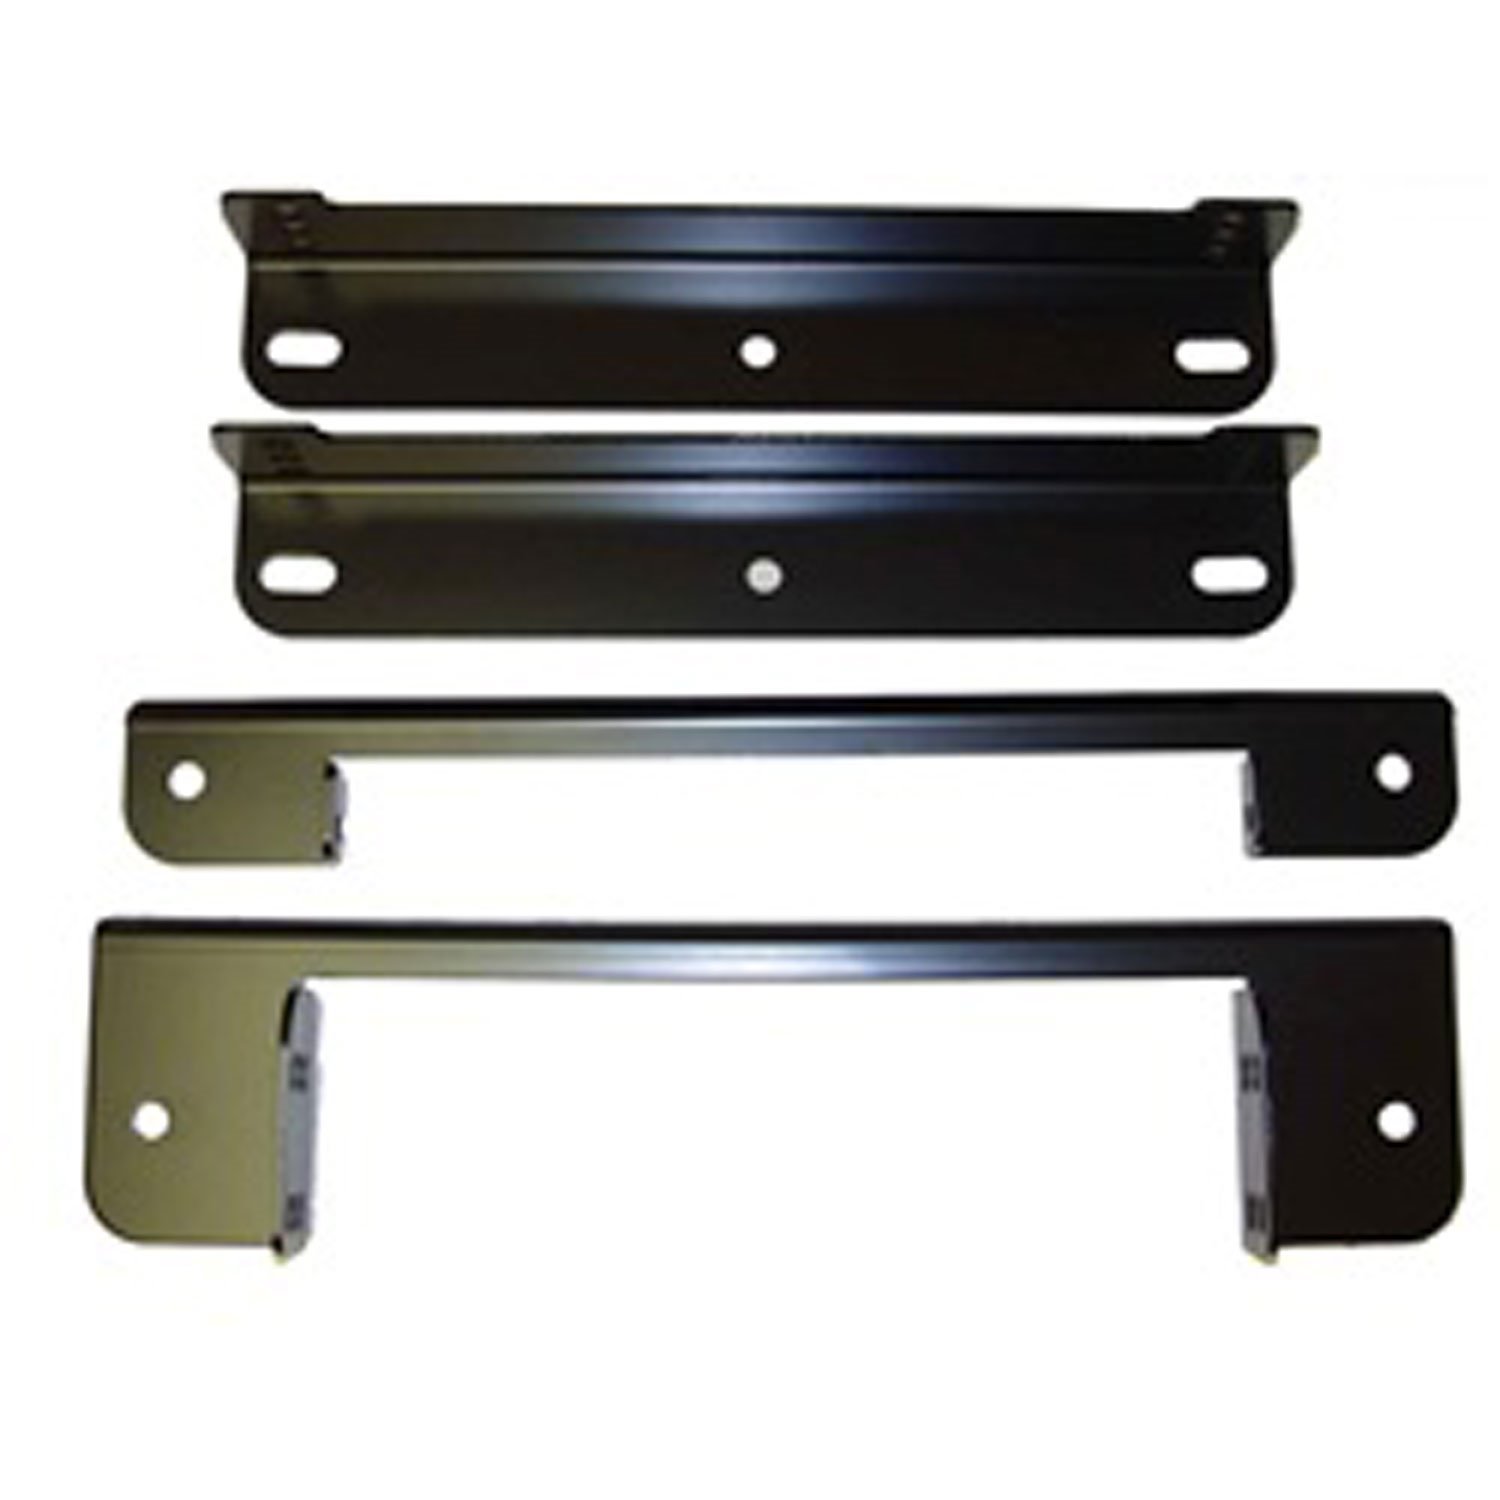 This seat bracket adapter from Omix-ADA fits 76-86 Jeep CJ and 87-90 Wrangler.